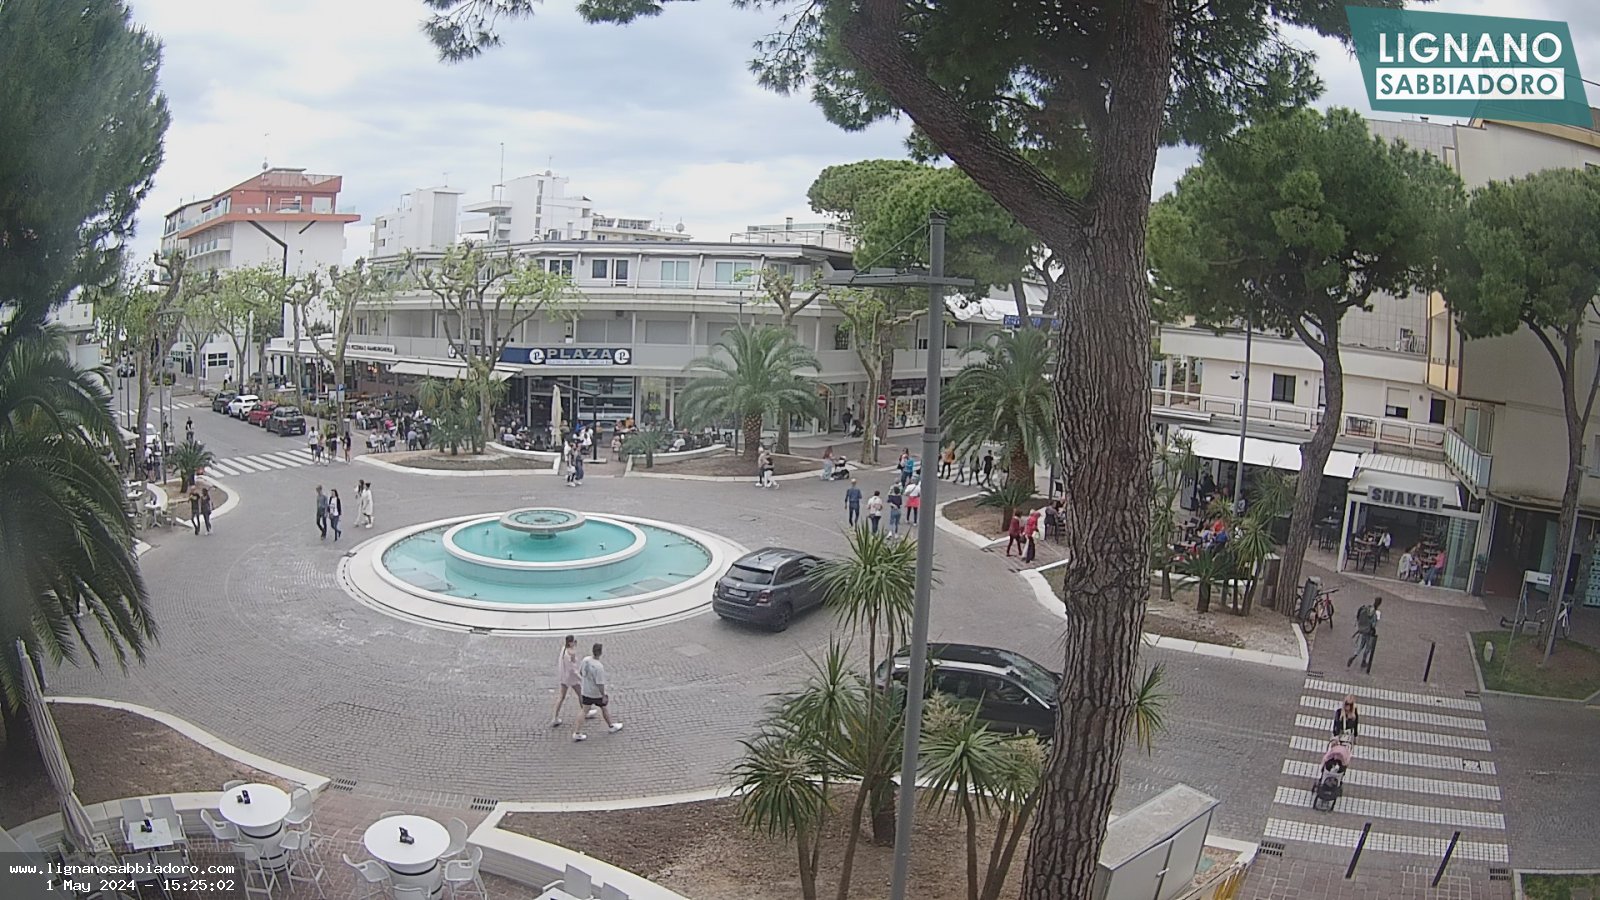 Webcam live streaming in Piazza Fontana in centro